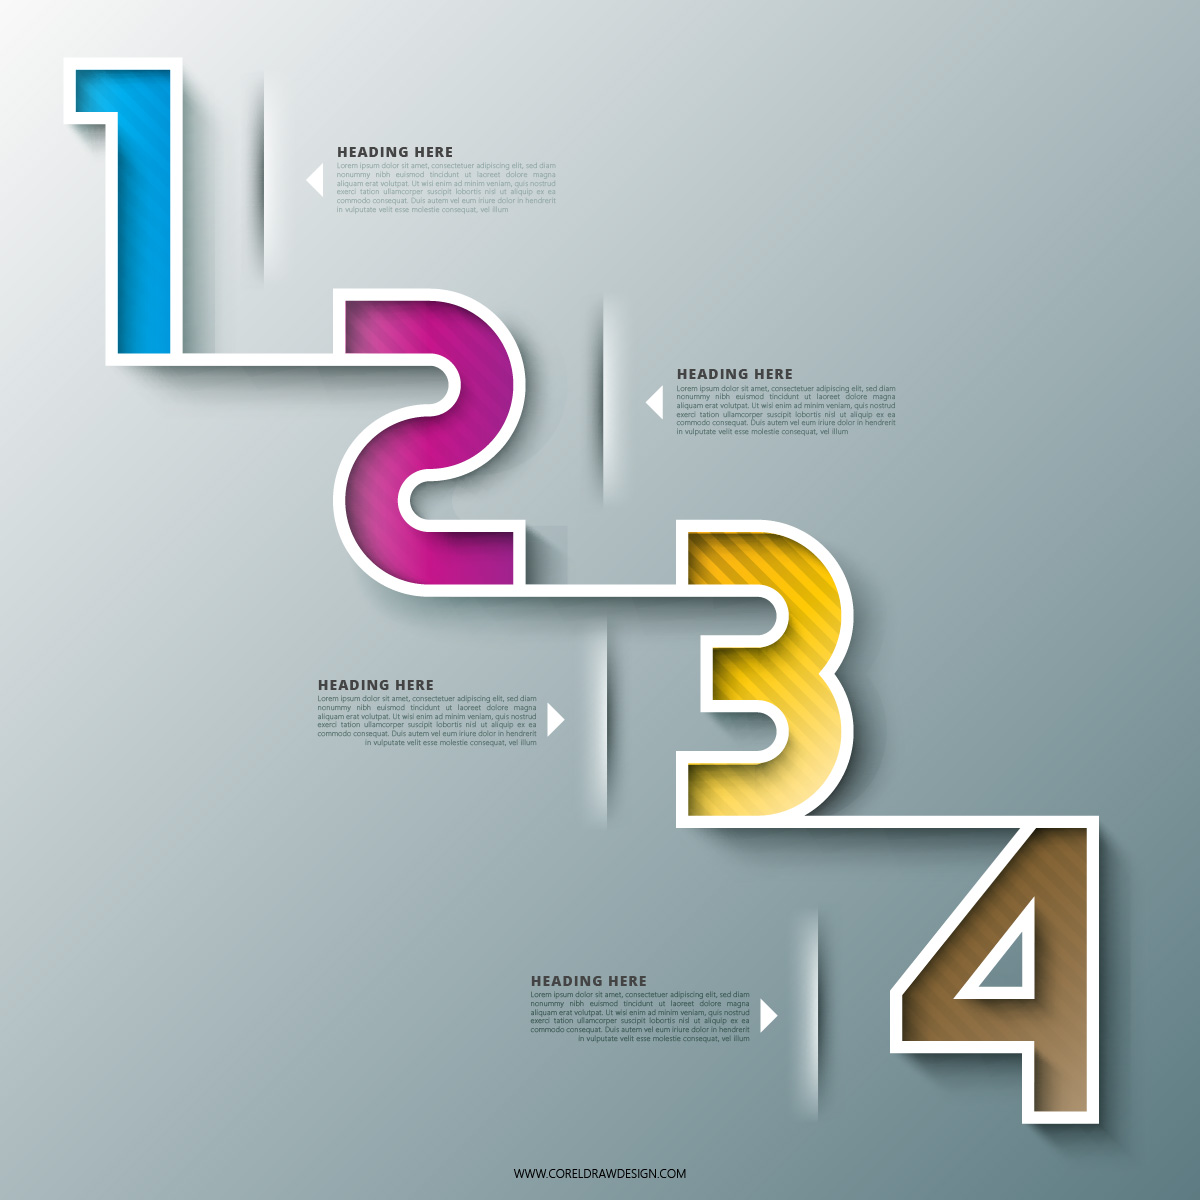 Numbering Step Wise Infographic Elements